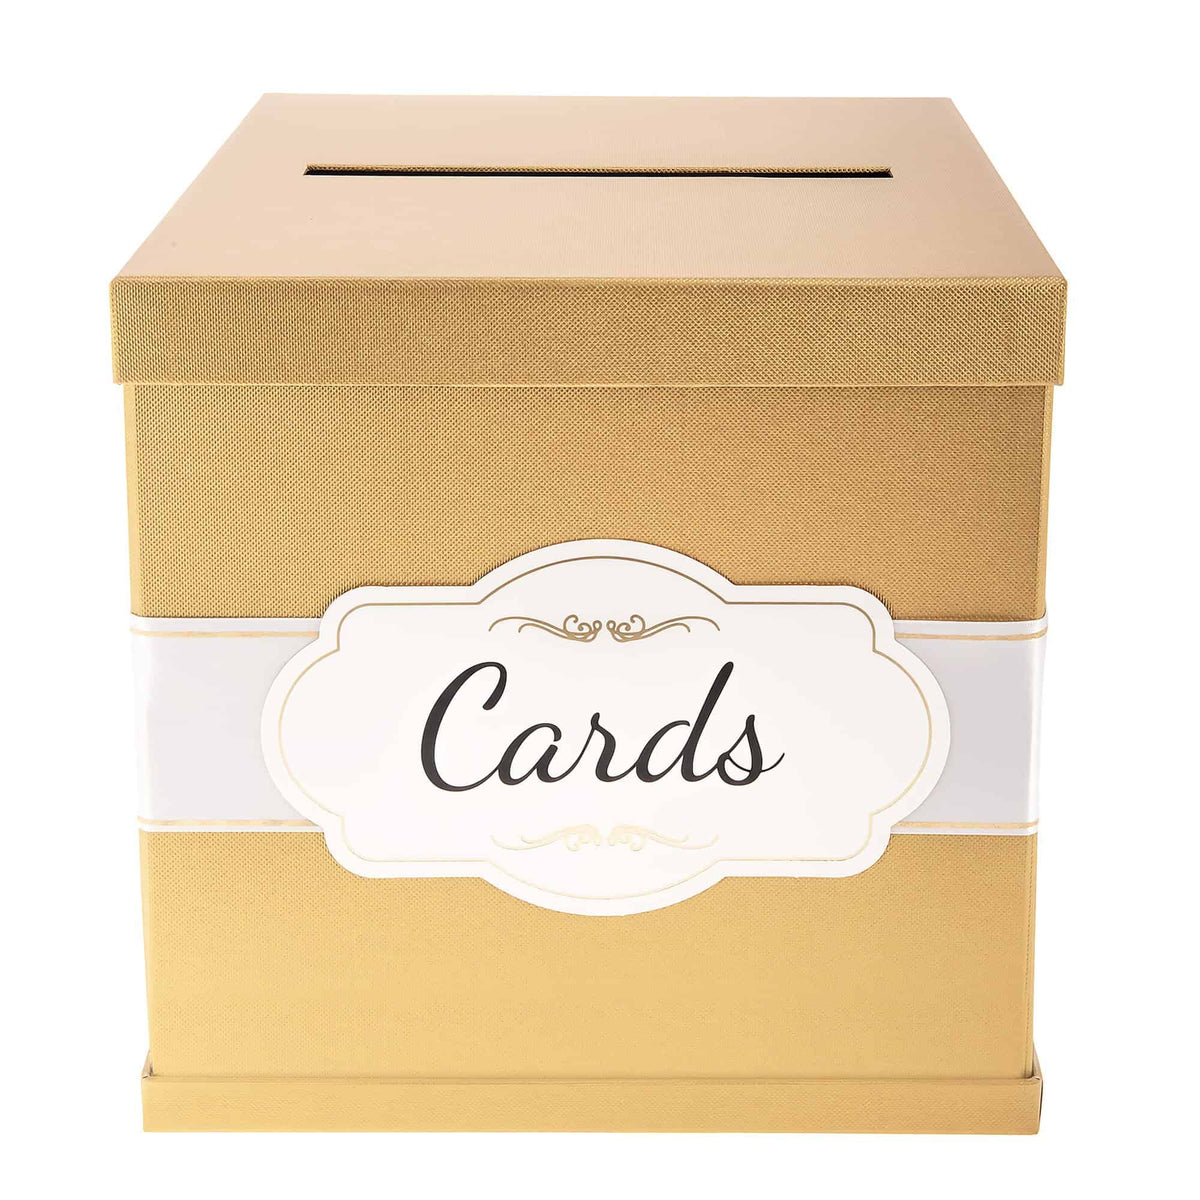 Colored Card Box - Gold, Rose Gold, Burlap, Silver, Black & White 10x10  inches - Merry Expressions